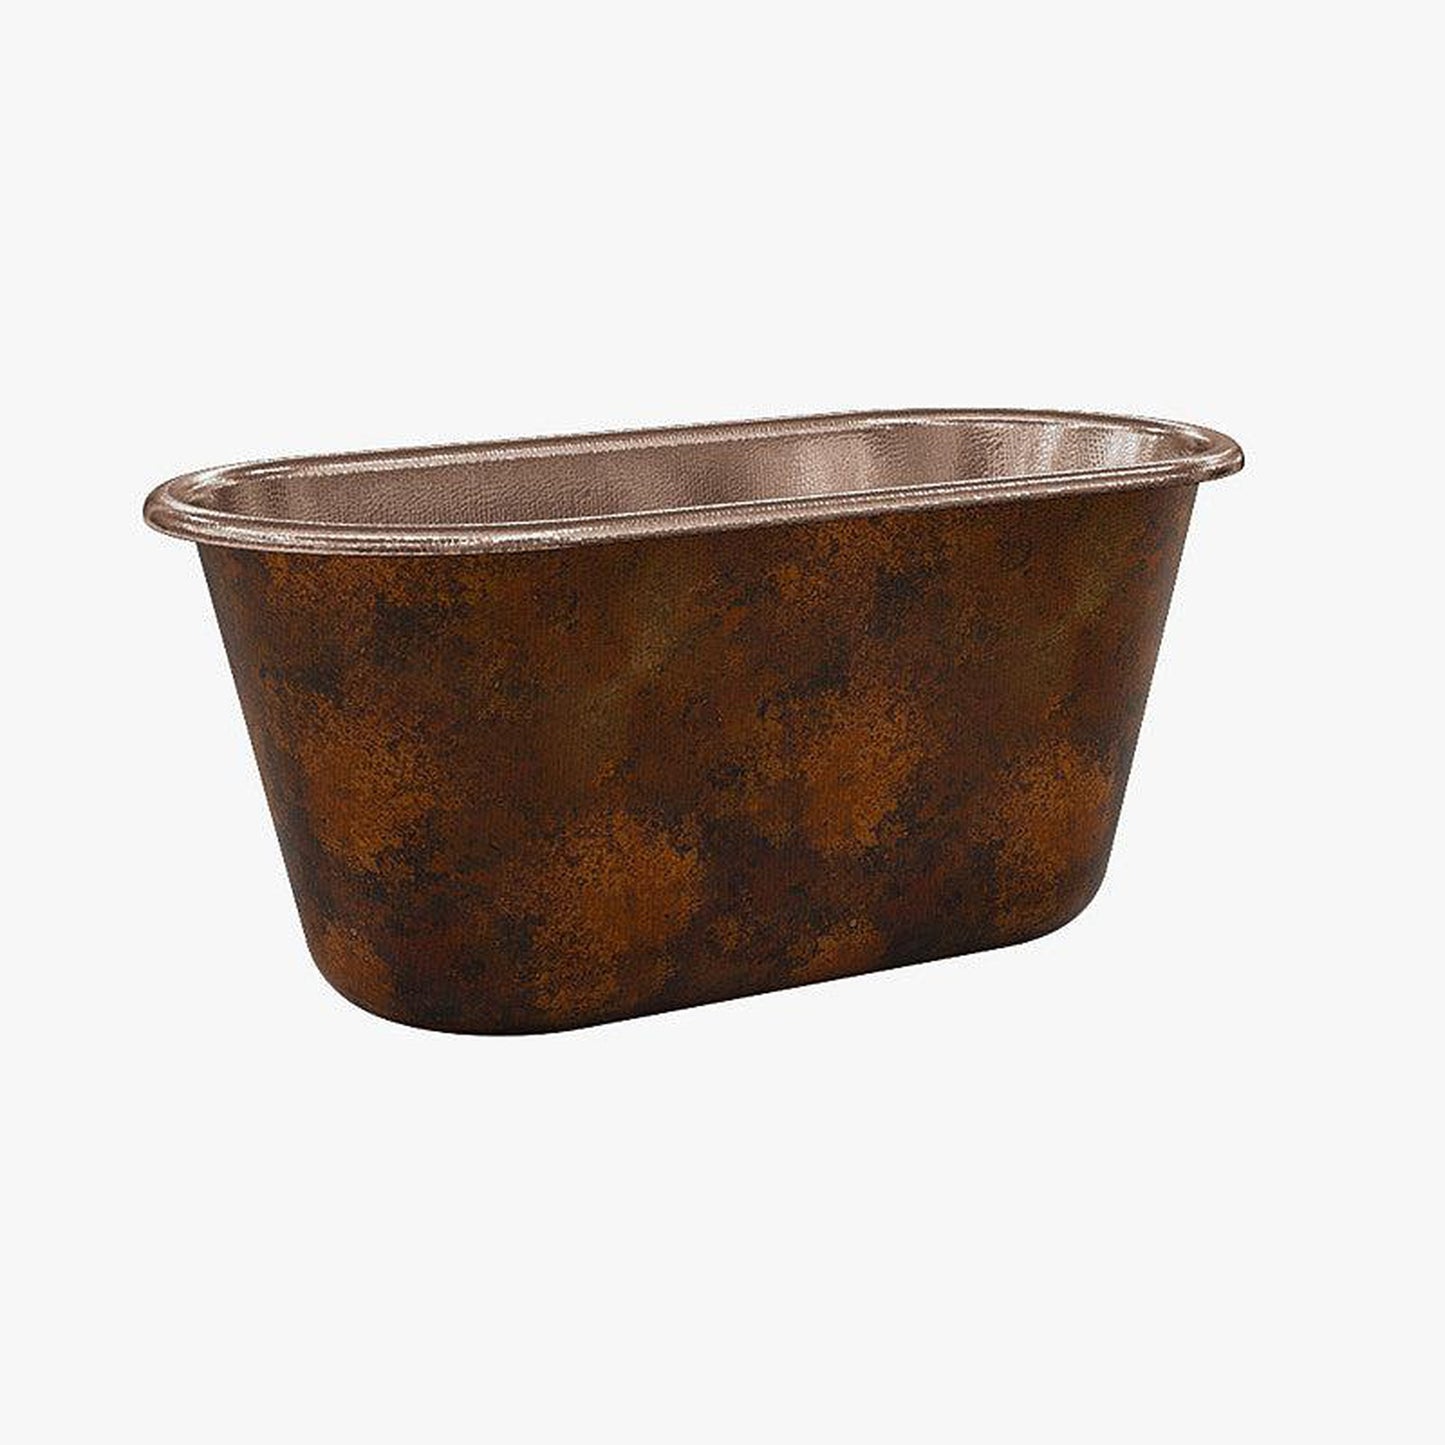 CopperSmith Heritage HX1 64" x 31" x 31" 16-Gauge Fire Copper Freestanding Bathtub With Polished Copper Interior and Polished Brass Overflow Drain and Polished Chrome Tub Filler